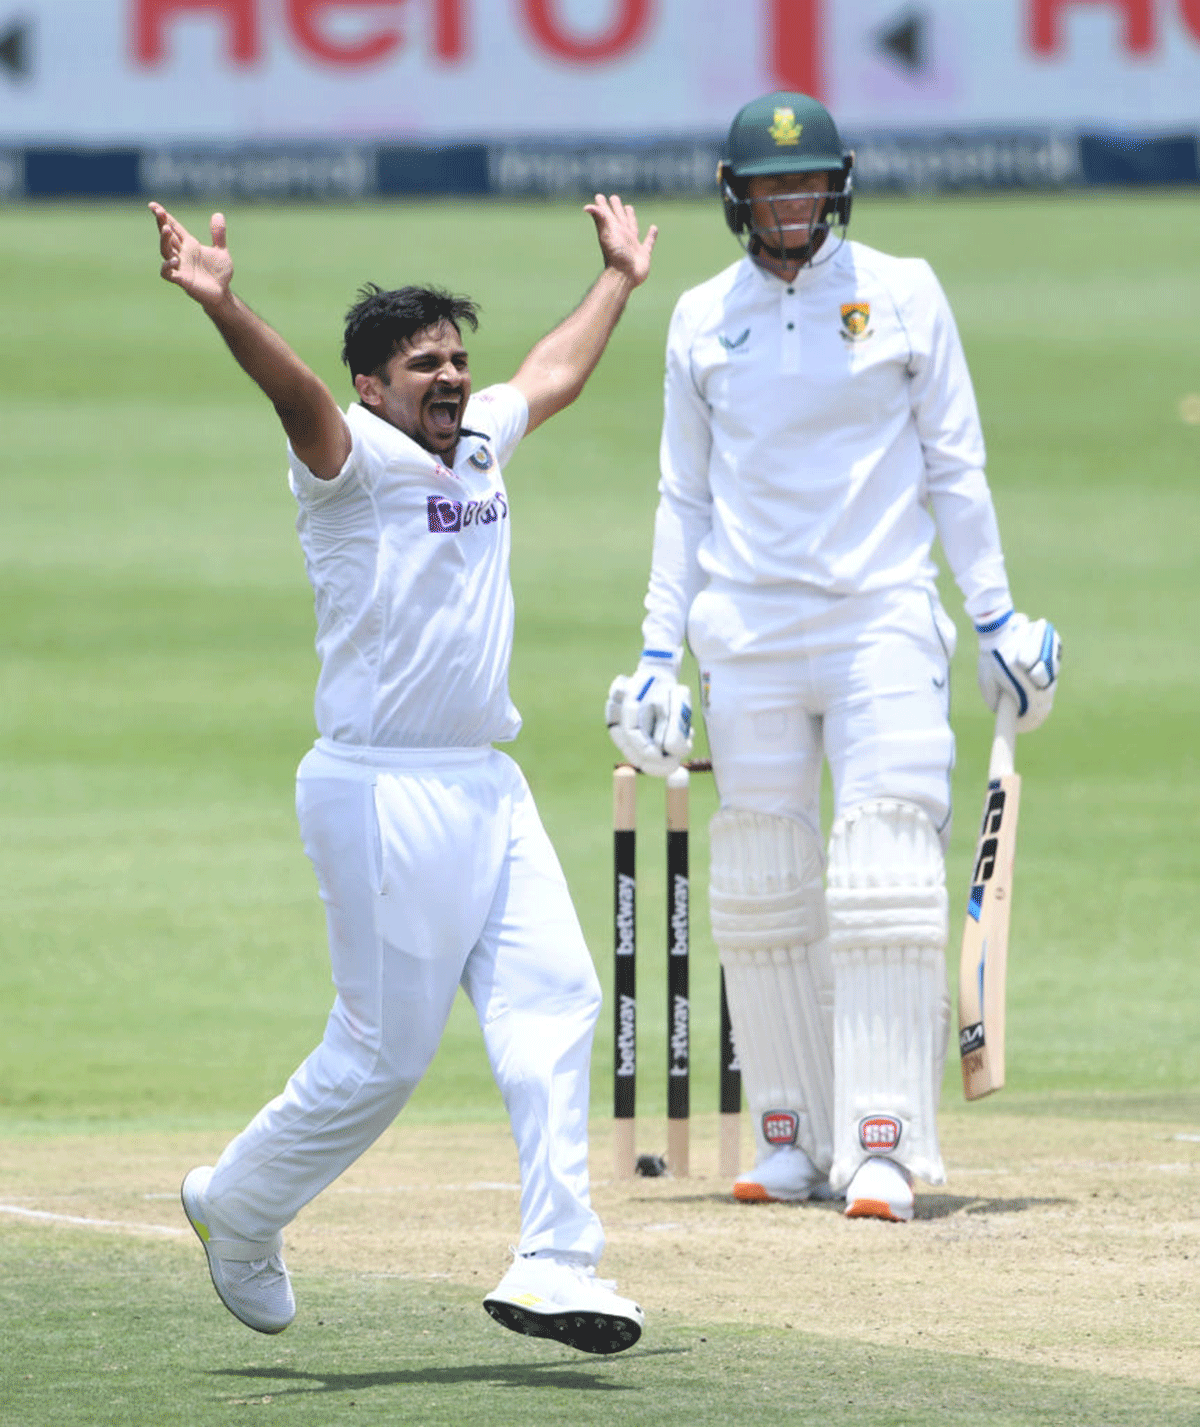 Shardul Thakur picked only one wicket in 19 overs in the first Test at Centurion and was effectively dropped for the 2nd Test at Cape Town that India won to level the series